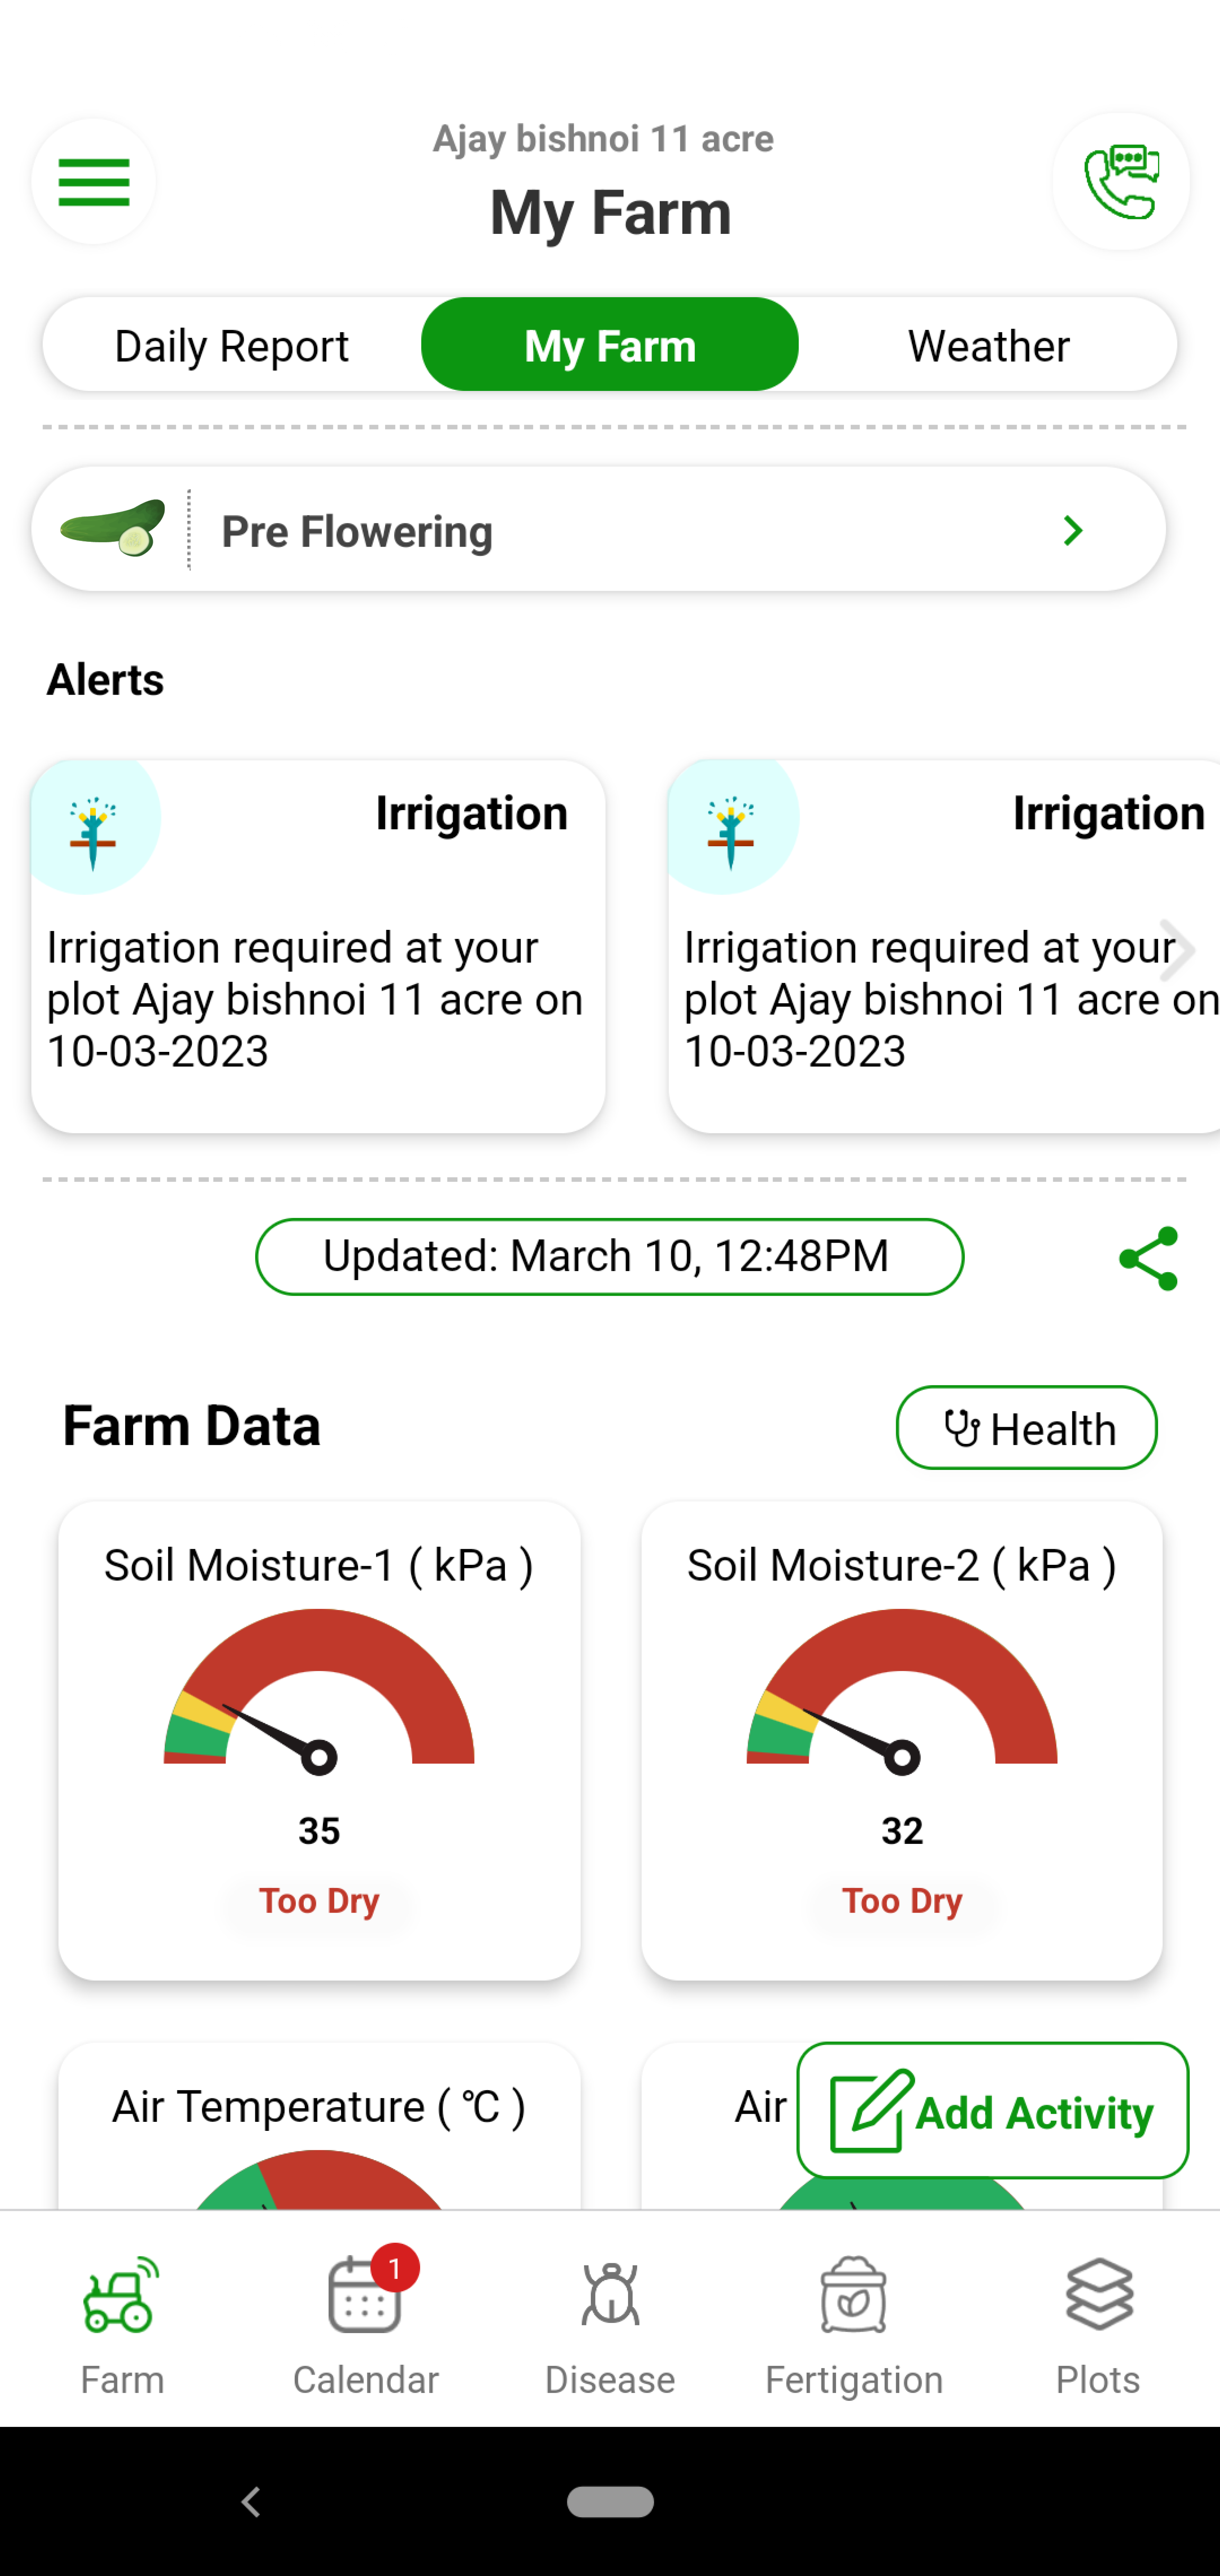 Irrigation is one of the important practices in cucurbit growing. Under irrigation can hamper the fruit size and quality. Over irrigation leads to wilting in the plants and more watery fruits. Cucurbits’ water requirements vary based on soil type and stage. With Fyllo’s device containing soil moisture and soil temperature sensor and intelligent software, you get alerts on how much water to provide to the crop. You can also see and visualize evapotranspiration (Etc) values of the crop. You can perfectly manage the water requirements to get the perfect size, color and sugar.